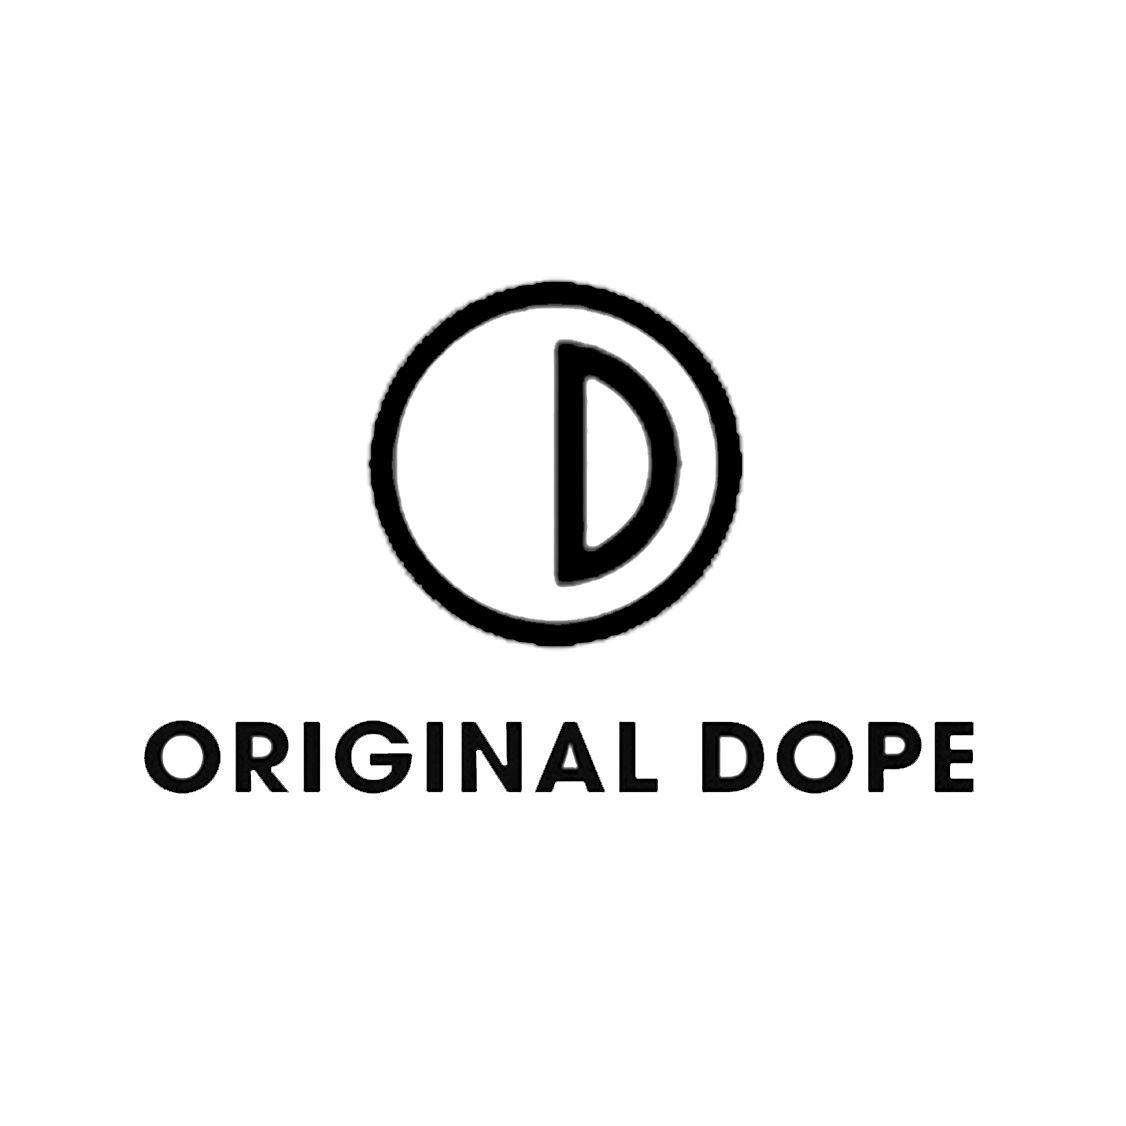 Red Dope Logo - Original Dope Archives - Cherry Red Records